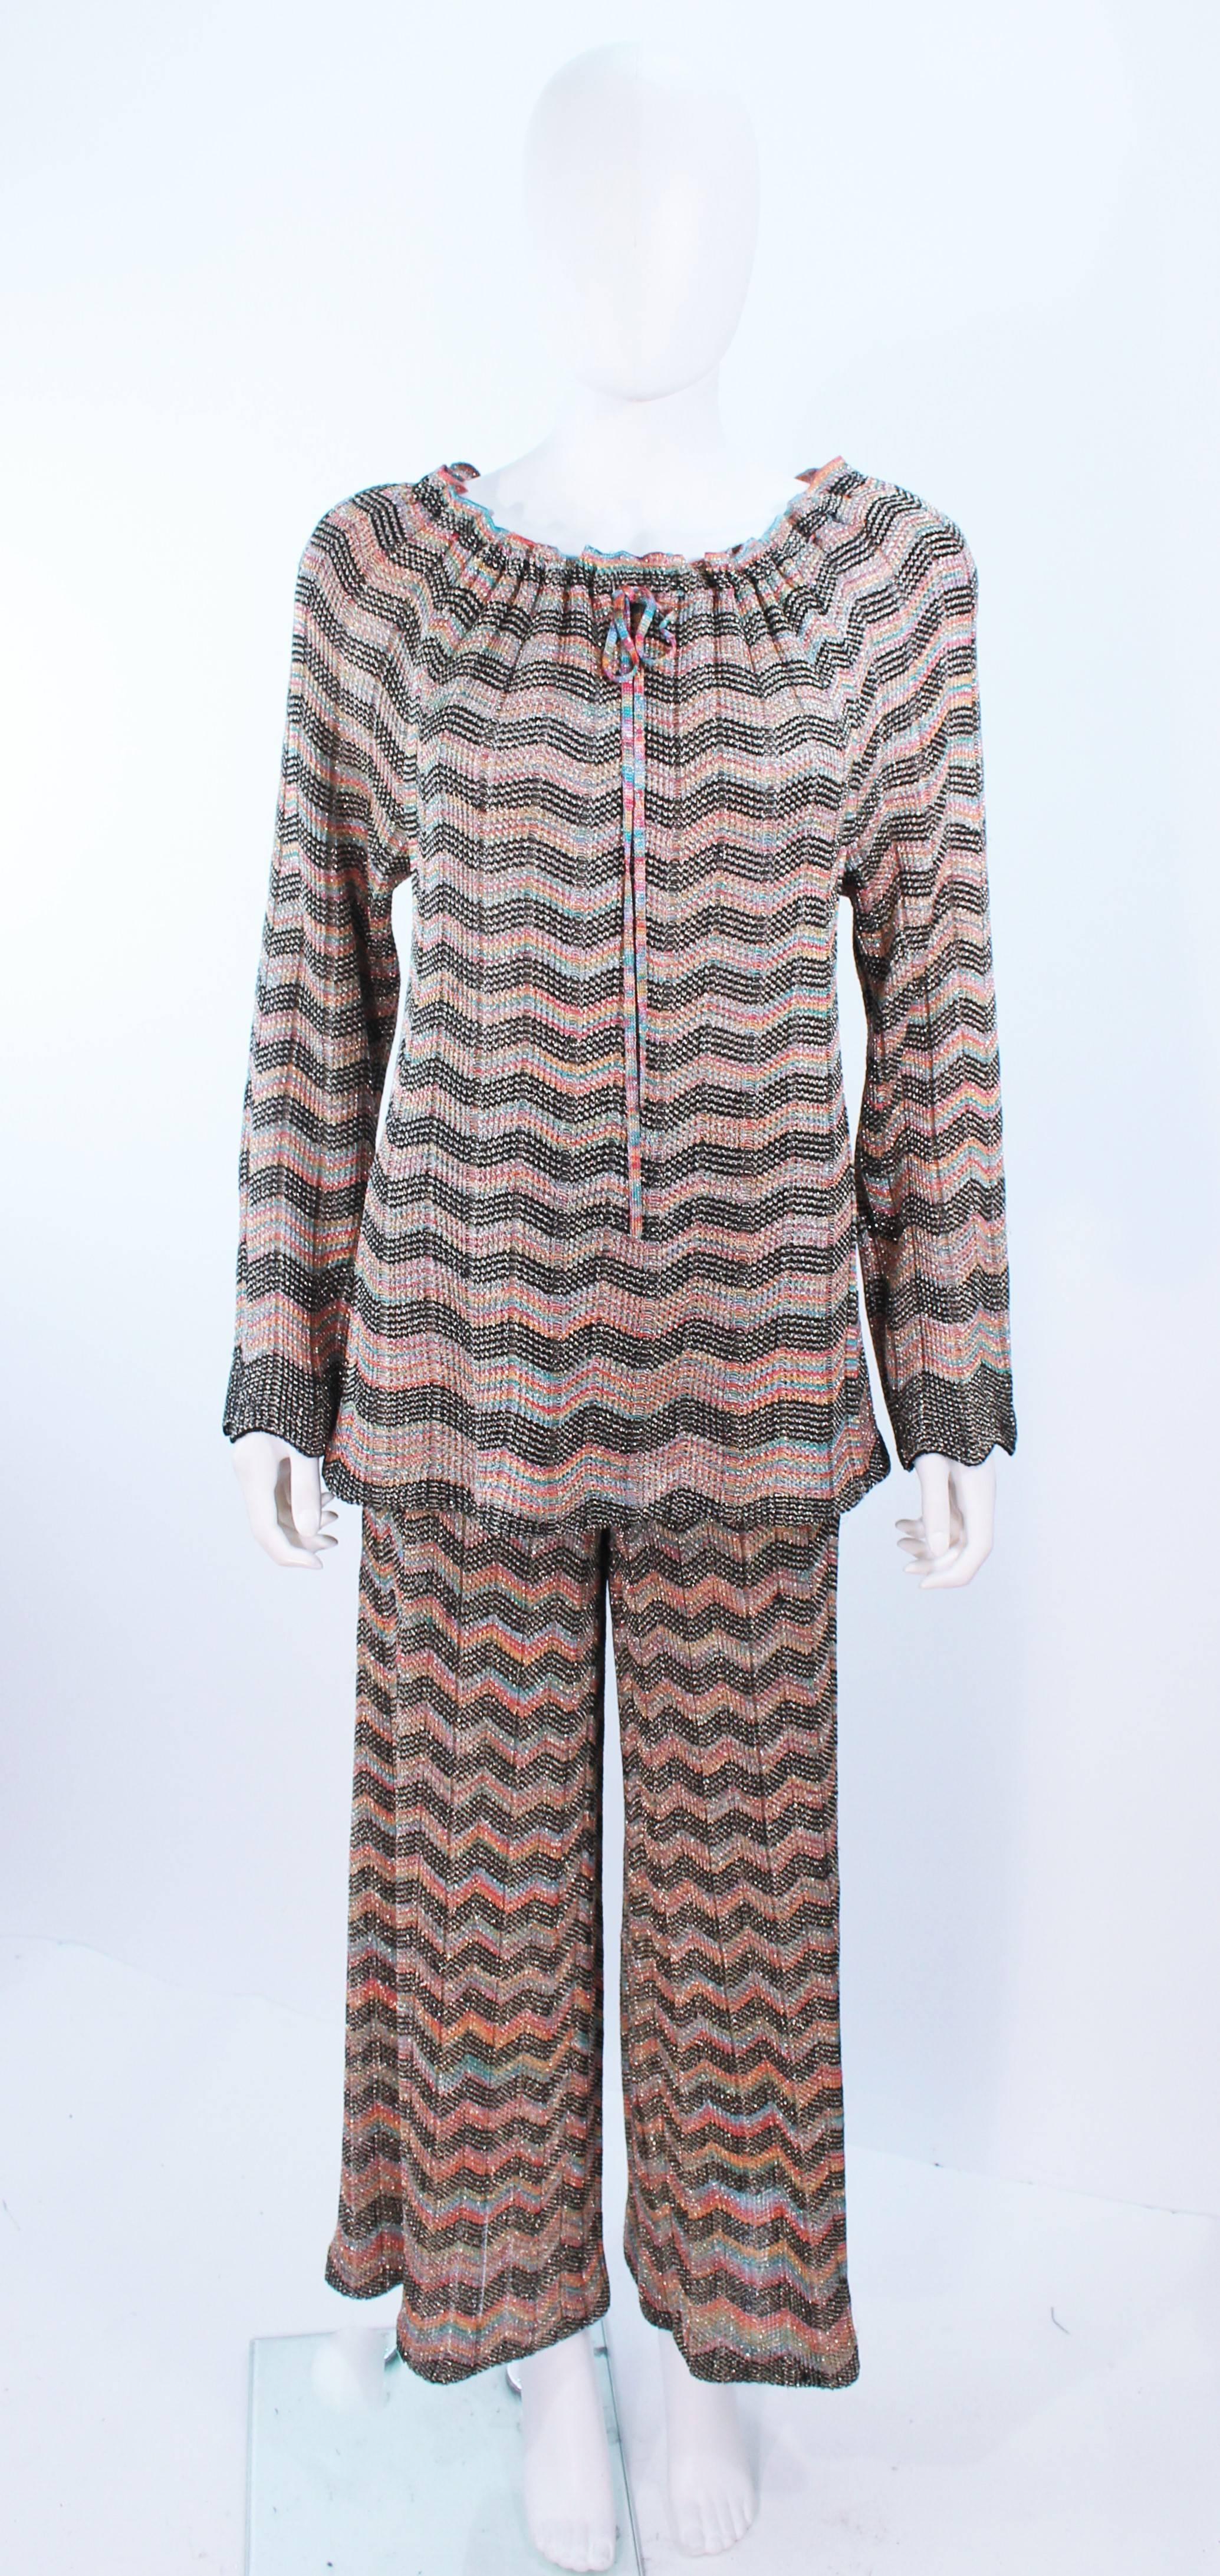 This Missoni design is composed of a metallic knit in a gold multi- color pattern. The blouse features a tie neck with shoulder pads, which can be removed to be worn off-the shoulder. In excellent vintage condition.

**Please cross-reference